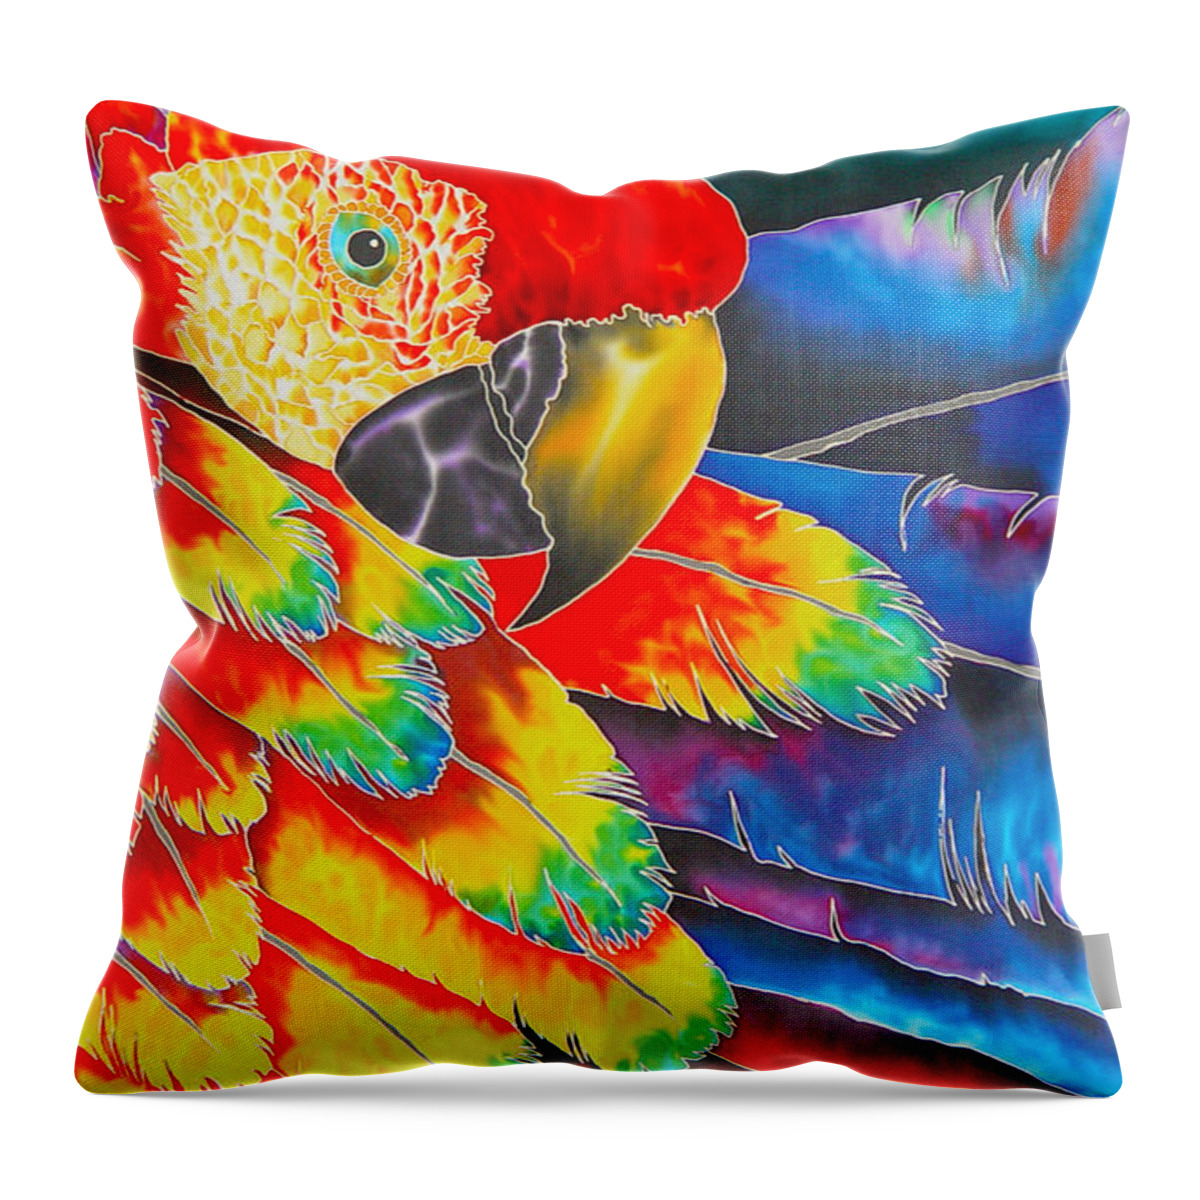 Scarlet Macaw Throw Pillow featuring the painting Scarlet Macaw by Daniel Jean-Baptiste